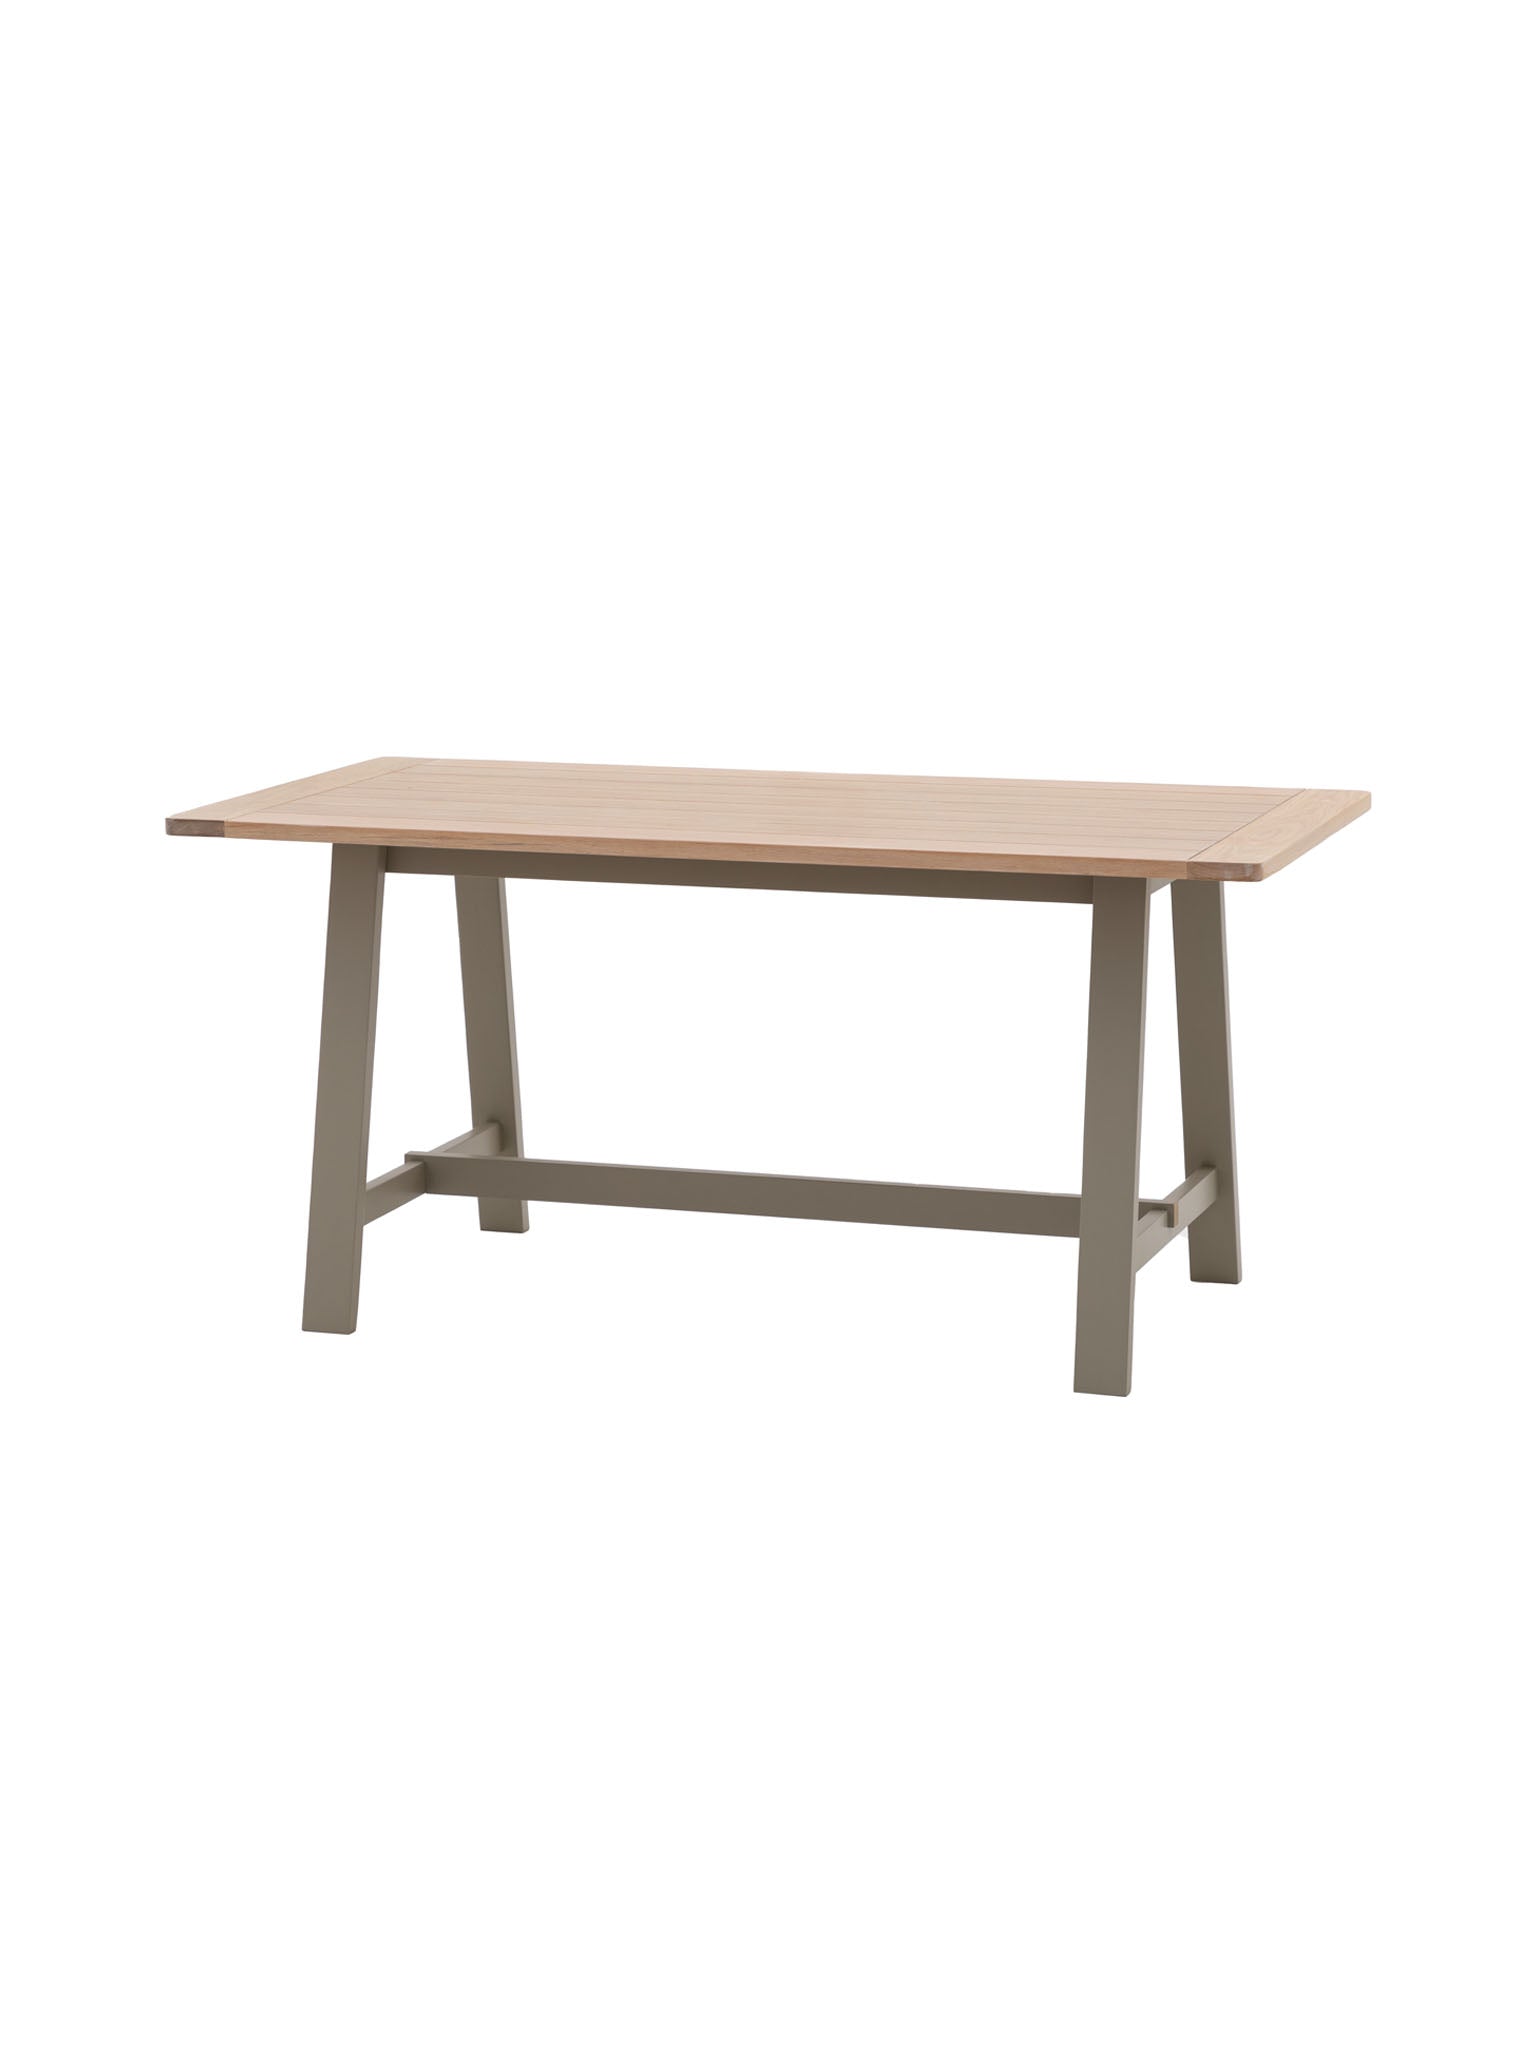 Farmhouse Oak Top Trestle table painted in olive